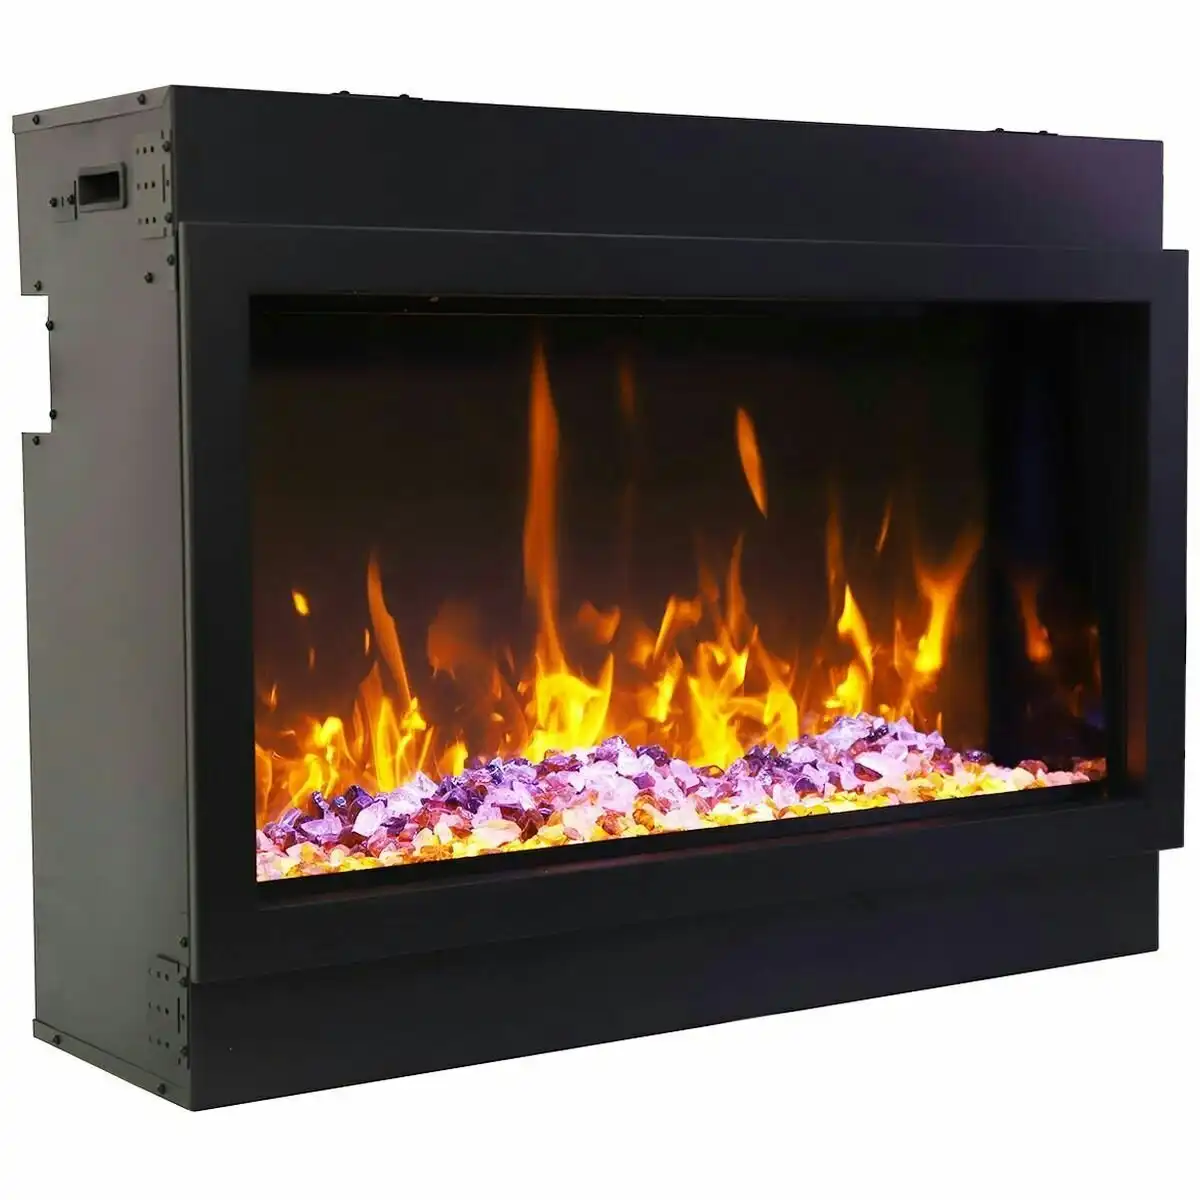 Remii 65 Inch Extra Tall Indoor Built-in Electric Fireplace with Black Steel Surround